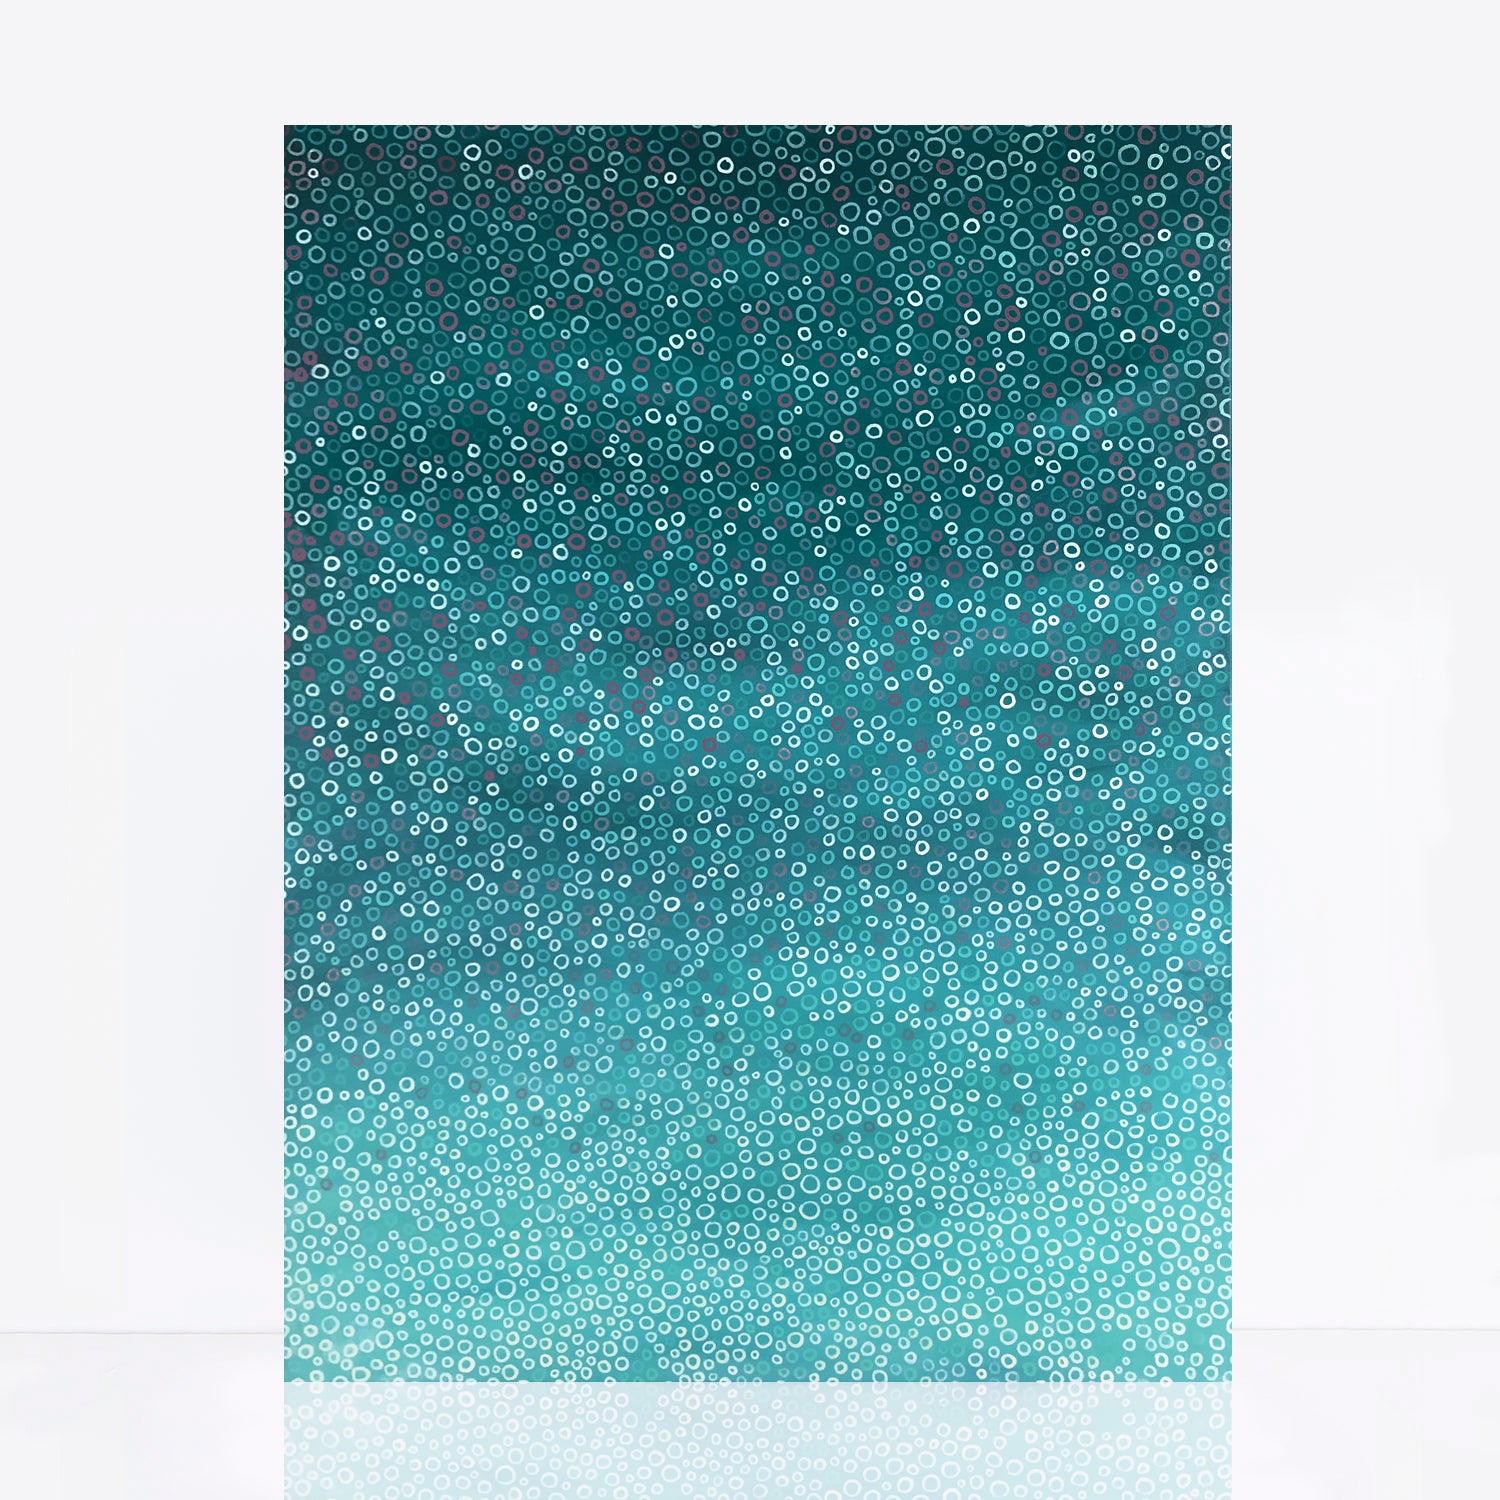 abstract painting in a mix of beautiful turquoise shades with pops of pink inspired by water